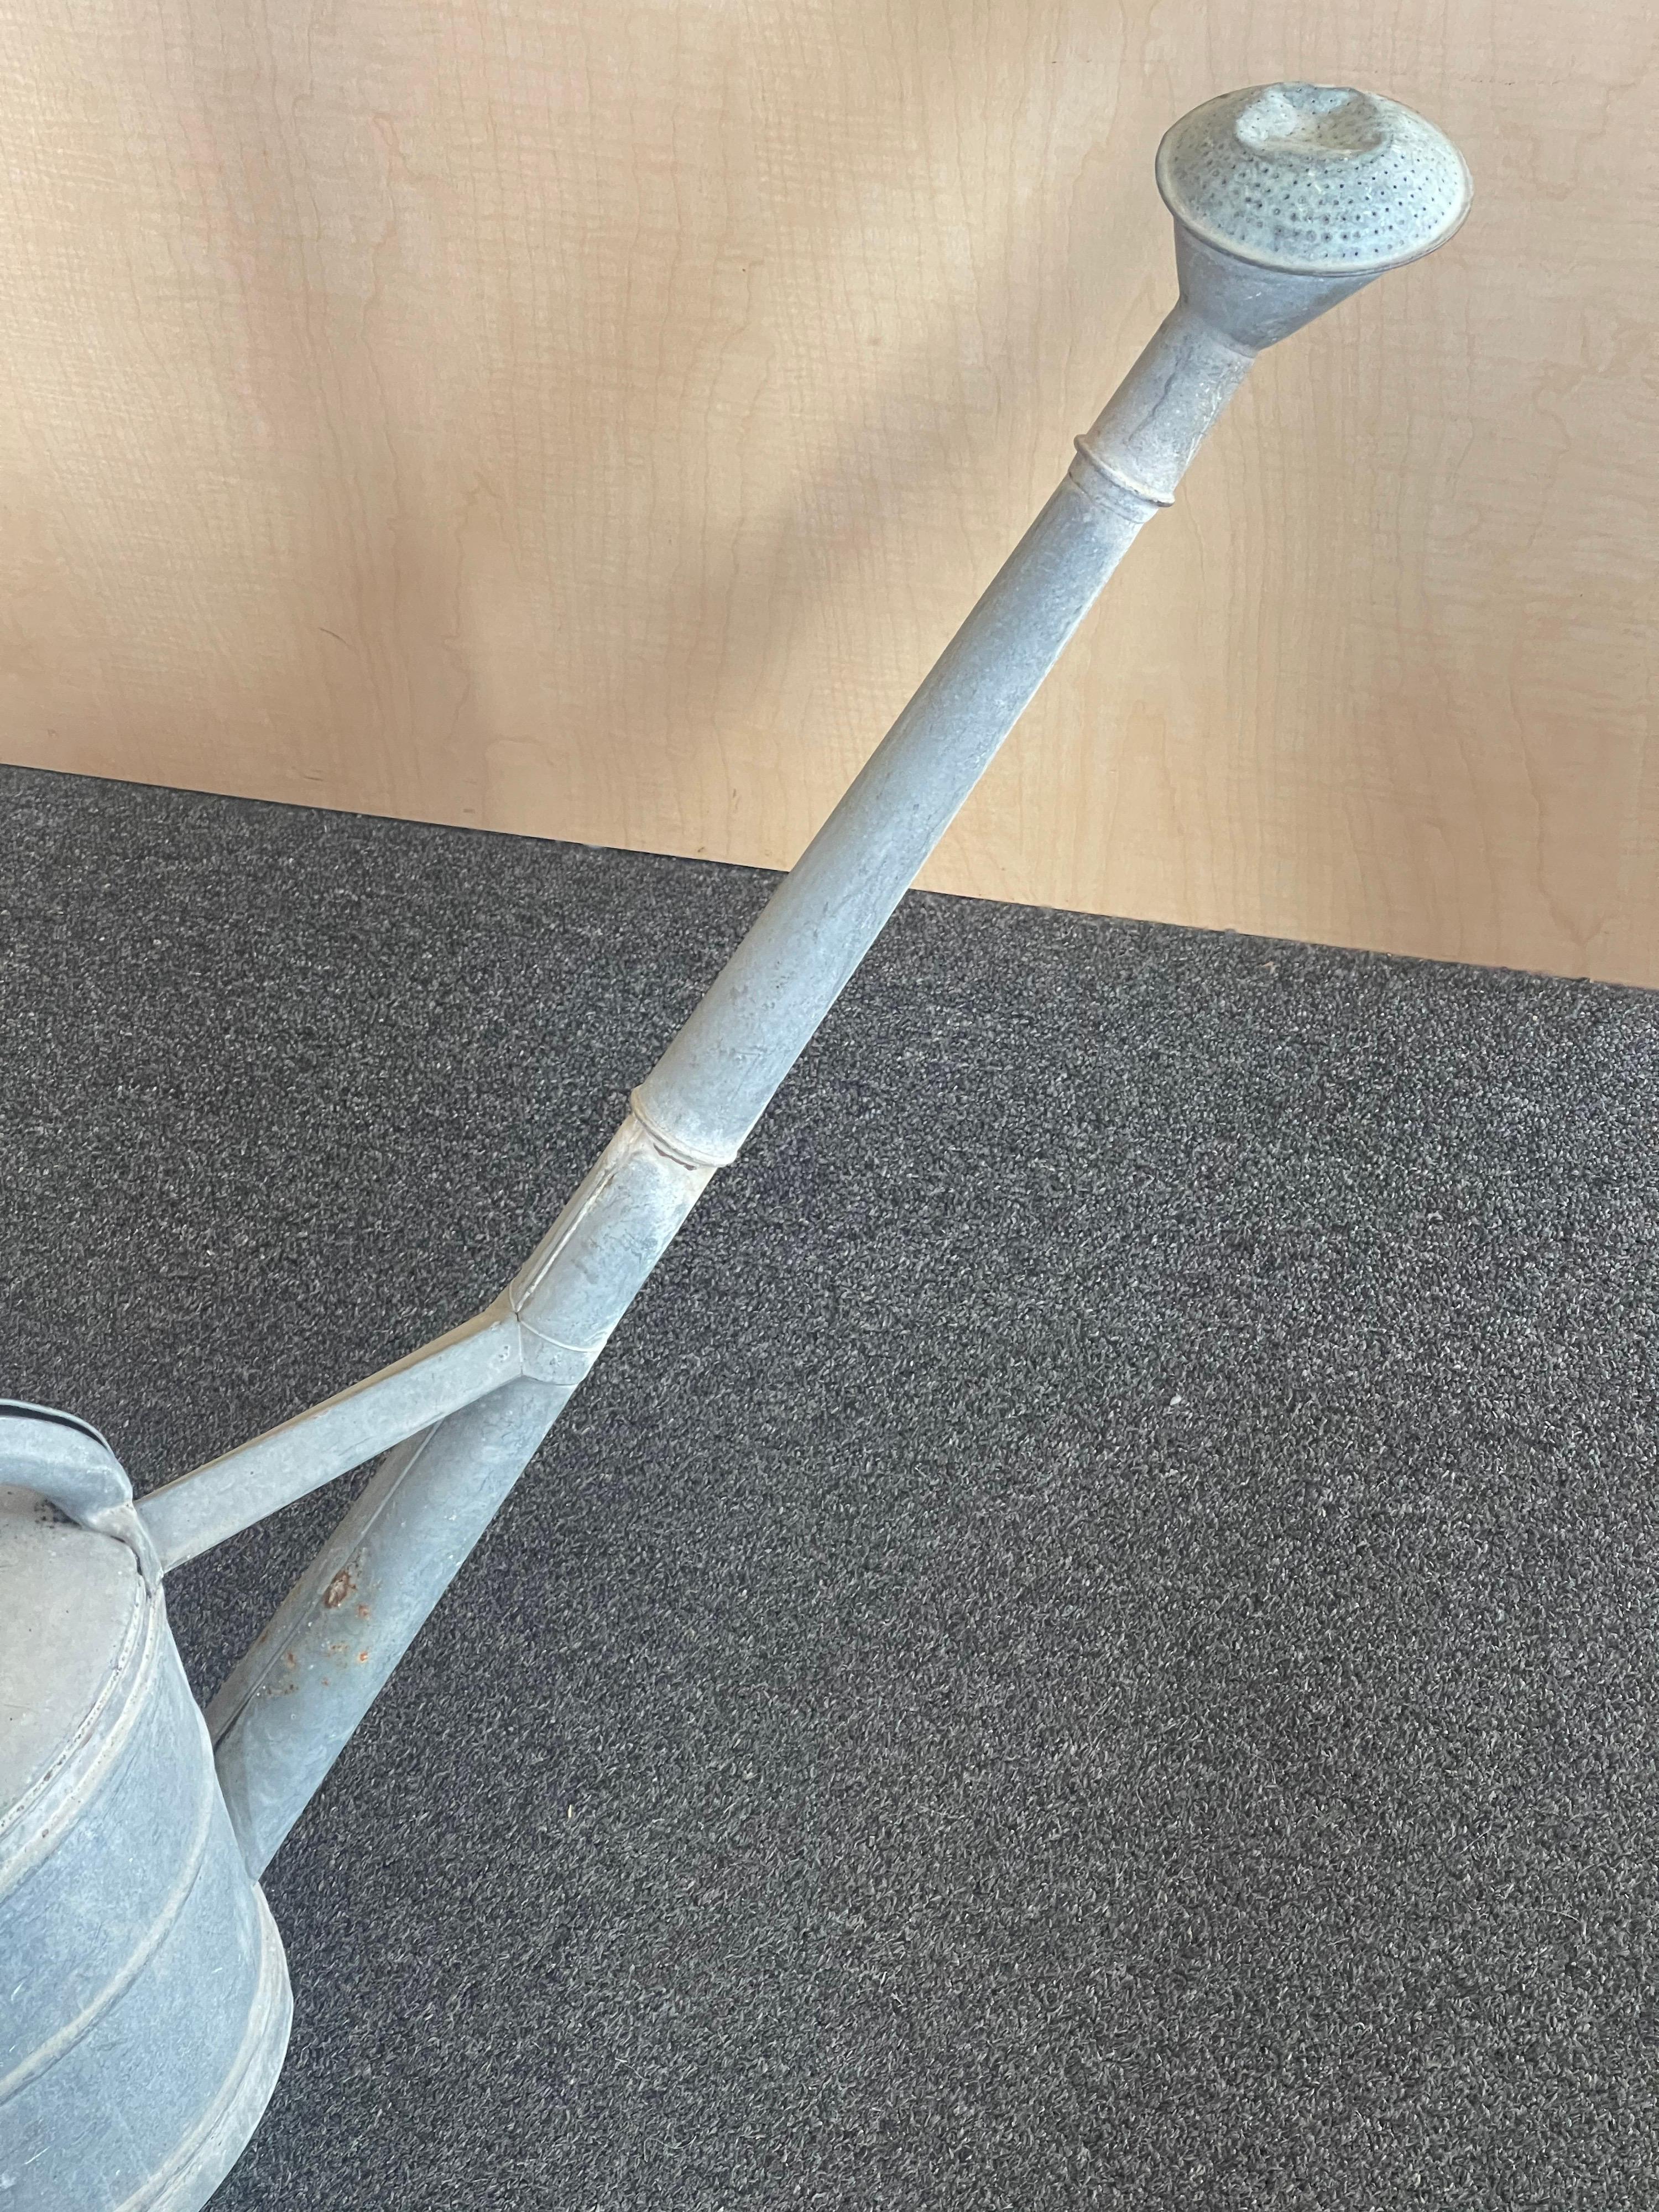 Vintage Galvanized Steel Watering Can by Schneiderkanne In Good Condition For Sale In San Diego, CA